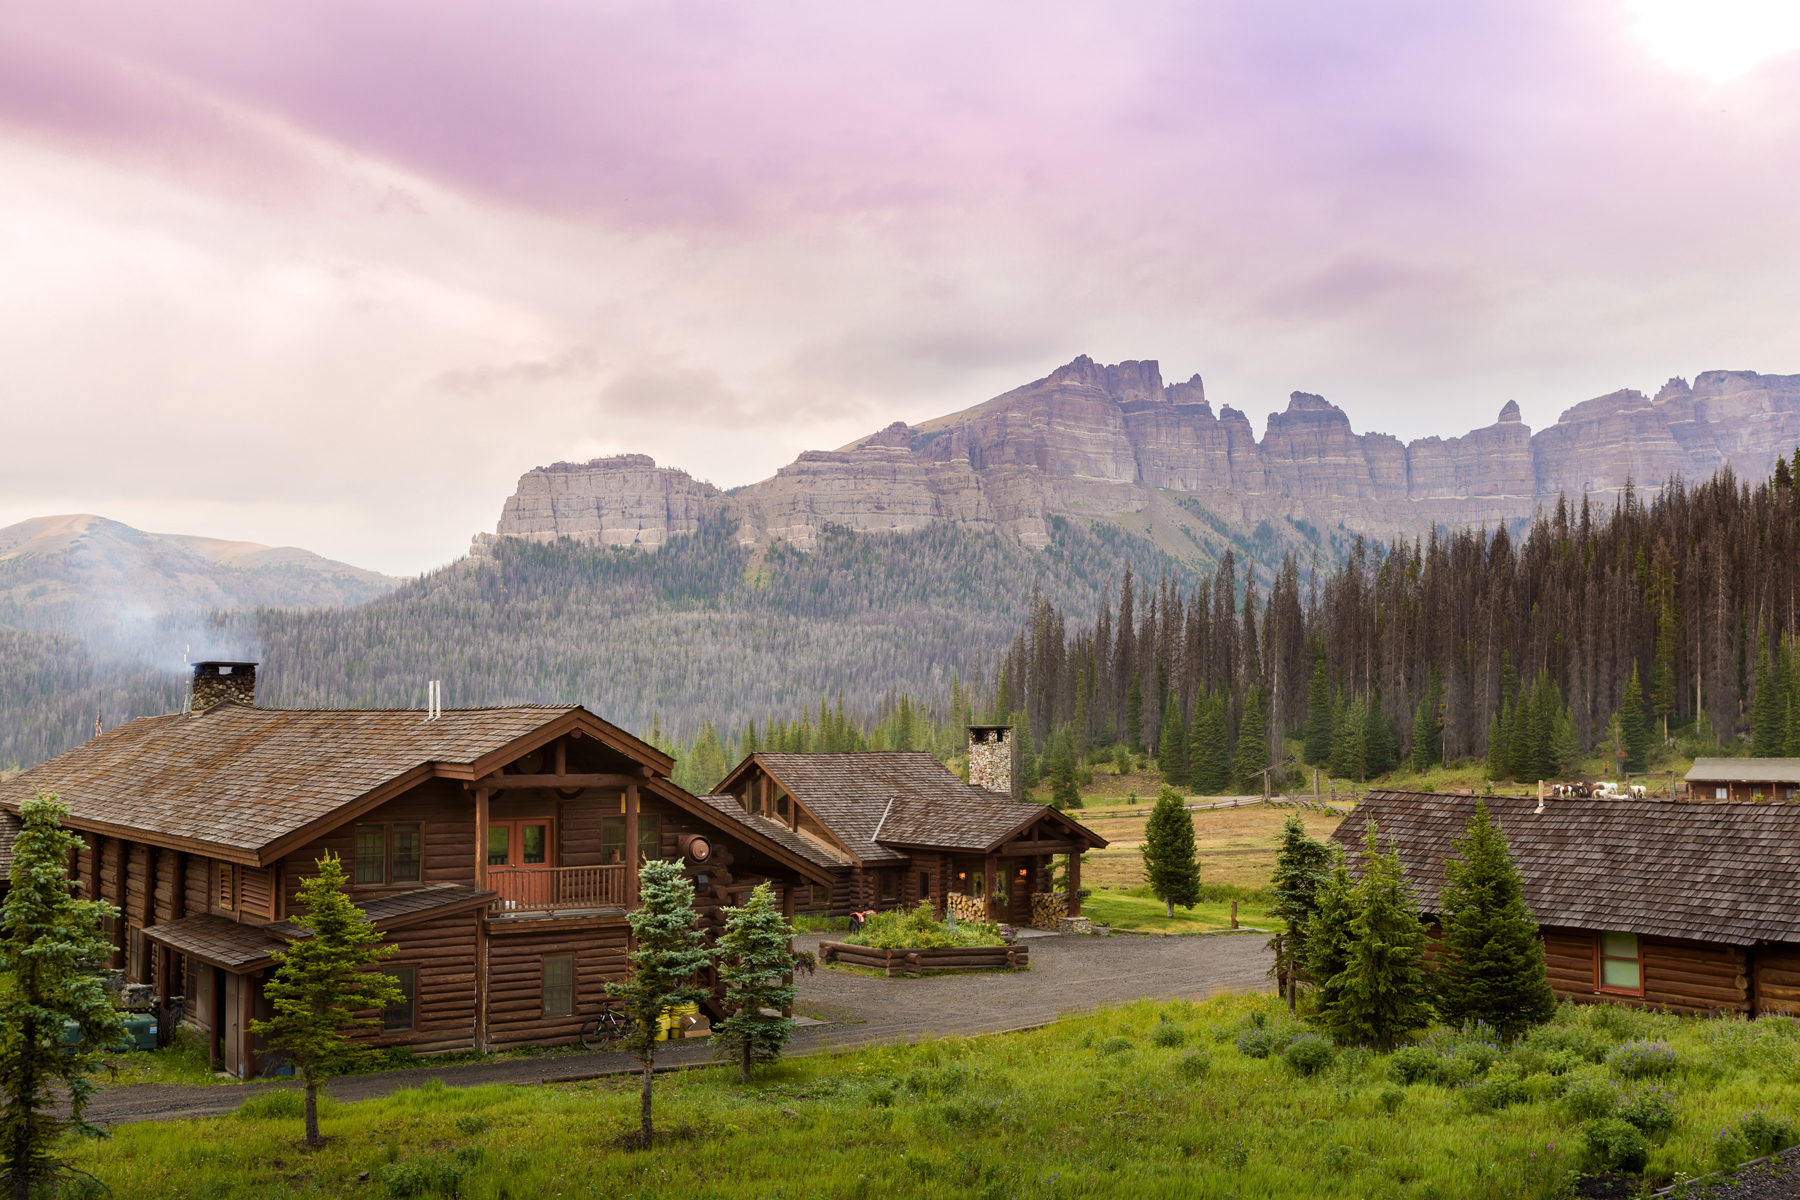 Brooks Lake Lodge late summer season offers value pricing for families on this get-away-from-it-all heaven plus culinary offerings with all new huckleberry season specials on the menu.